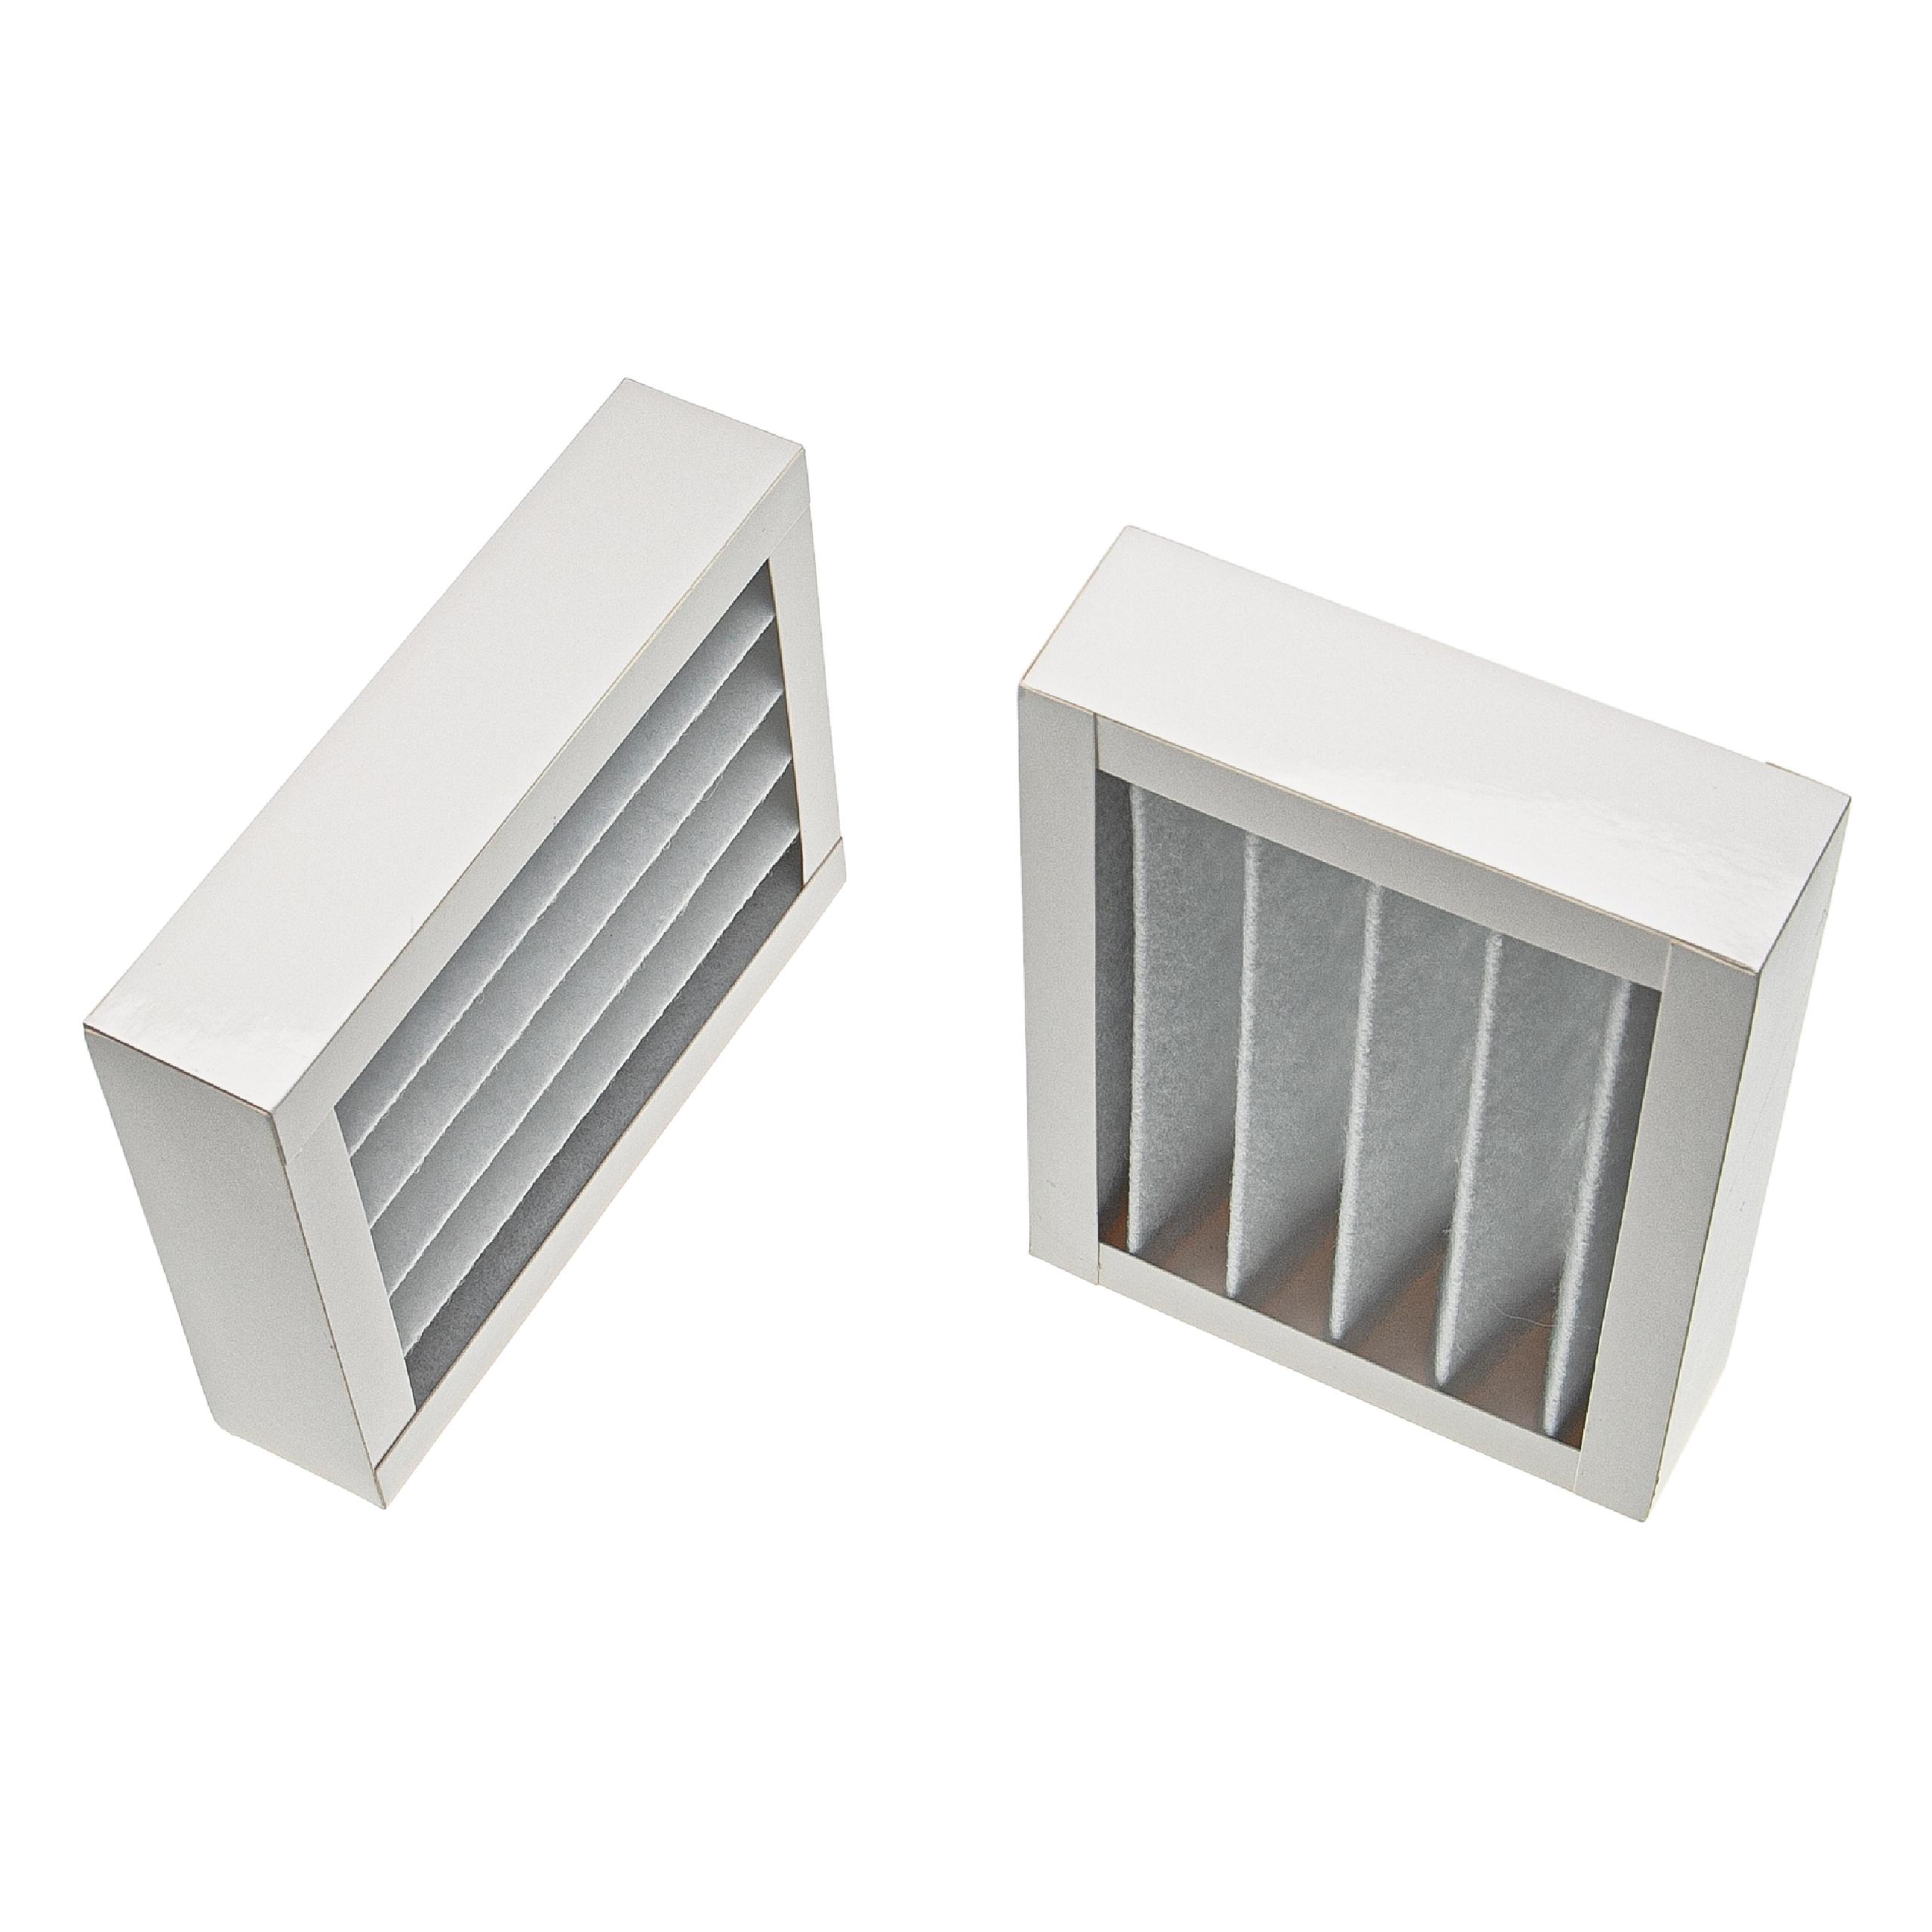 2x Filter G4 replaces Wernig 990202070, 527004700 for Wernig Air Ventilation Device etc. - Coarse Dust Filters